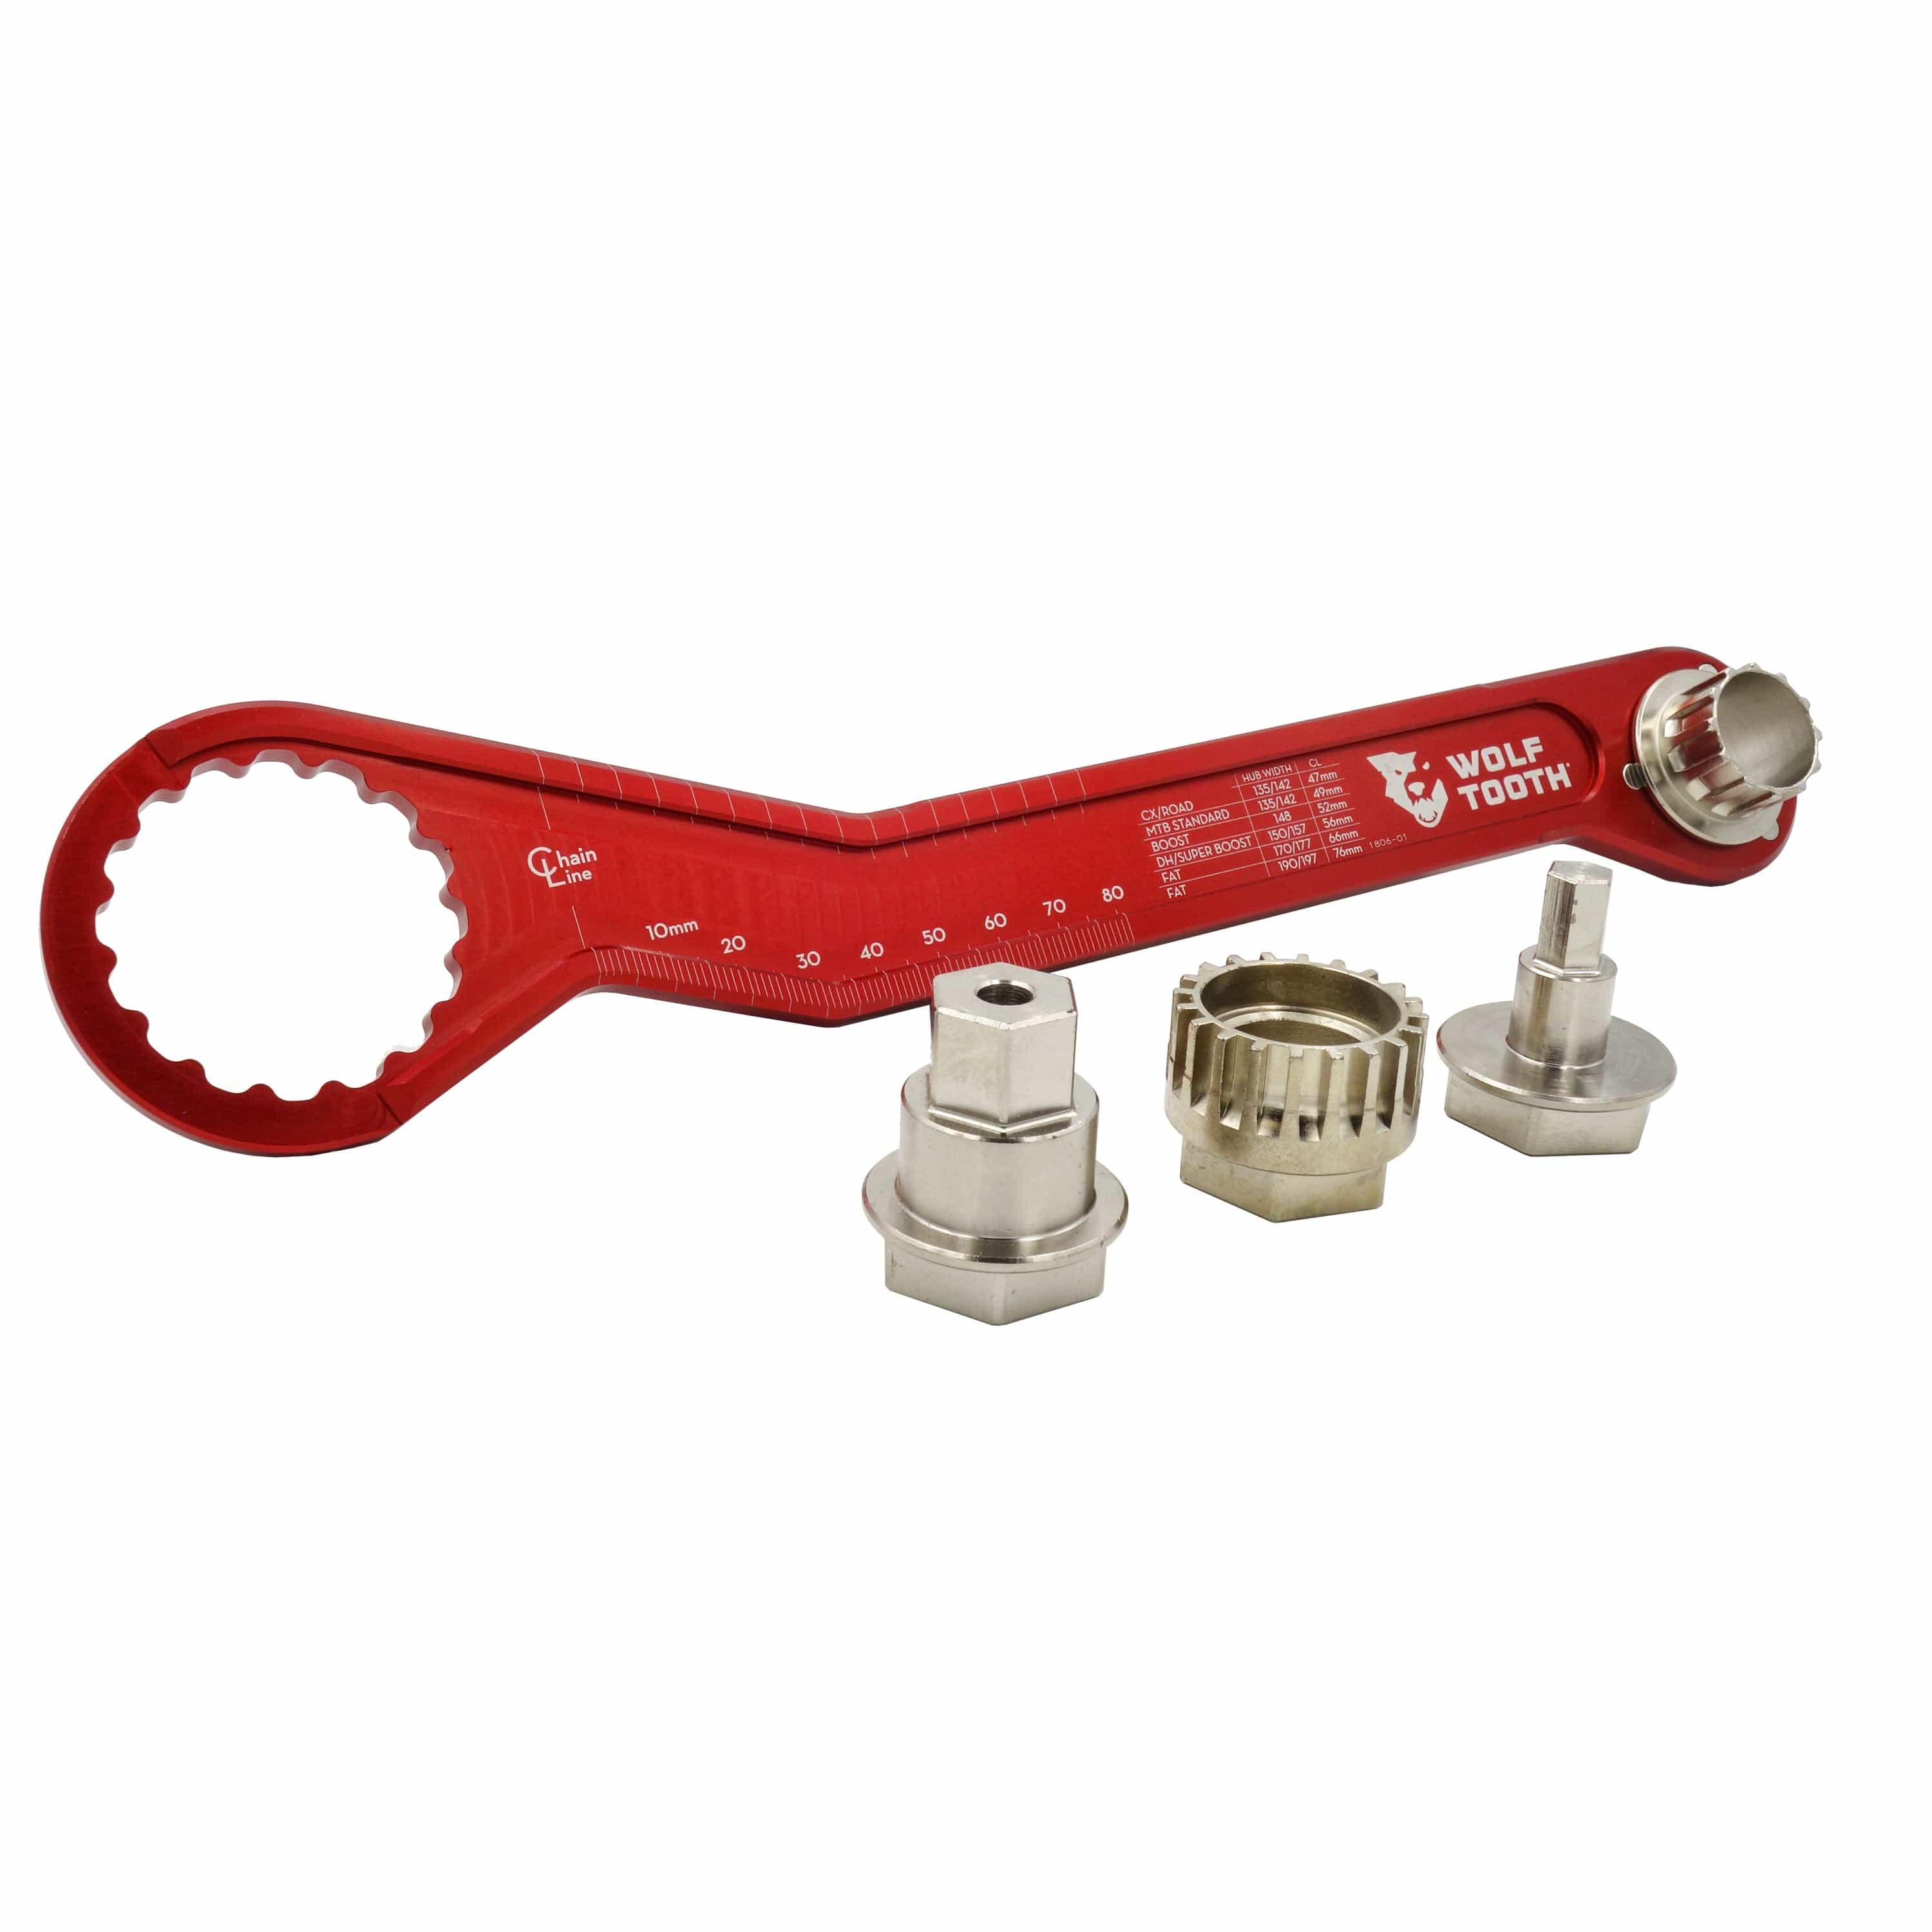 Pack Wrench and Inserts Kit - Ultralight BB Wrench and 1-Inch Hex Inse